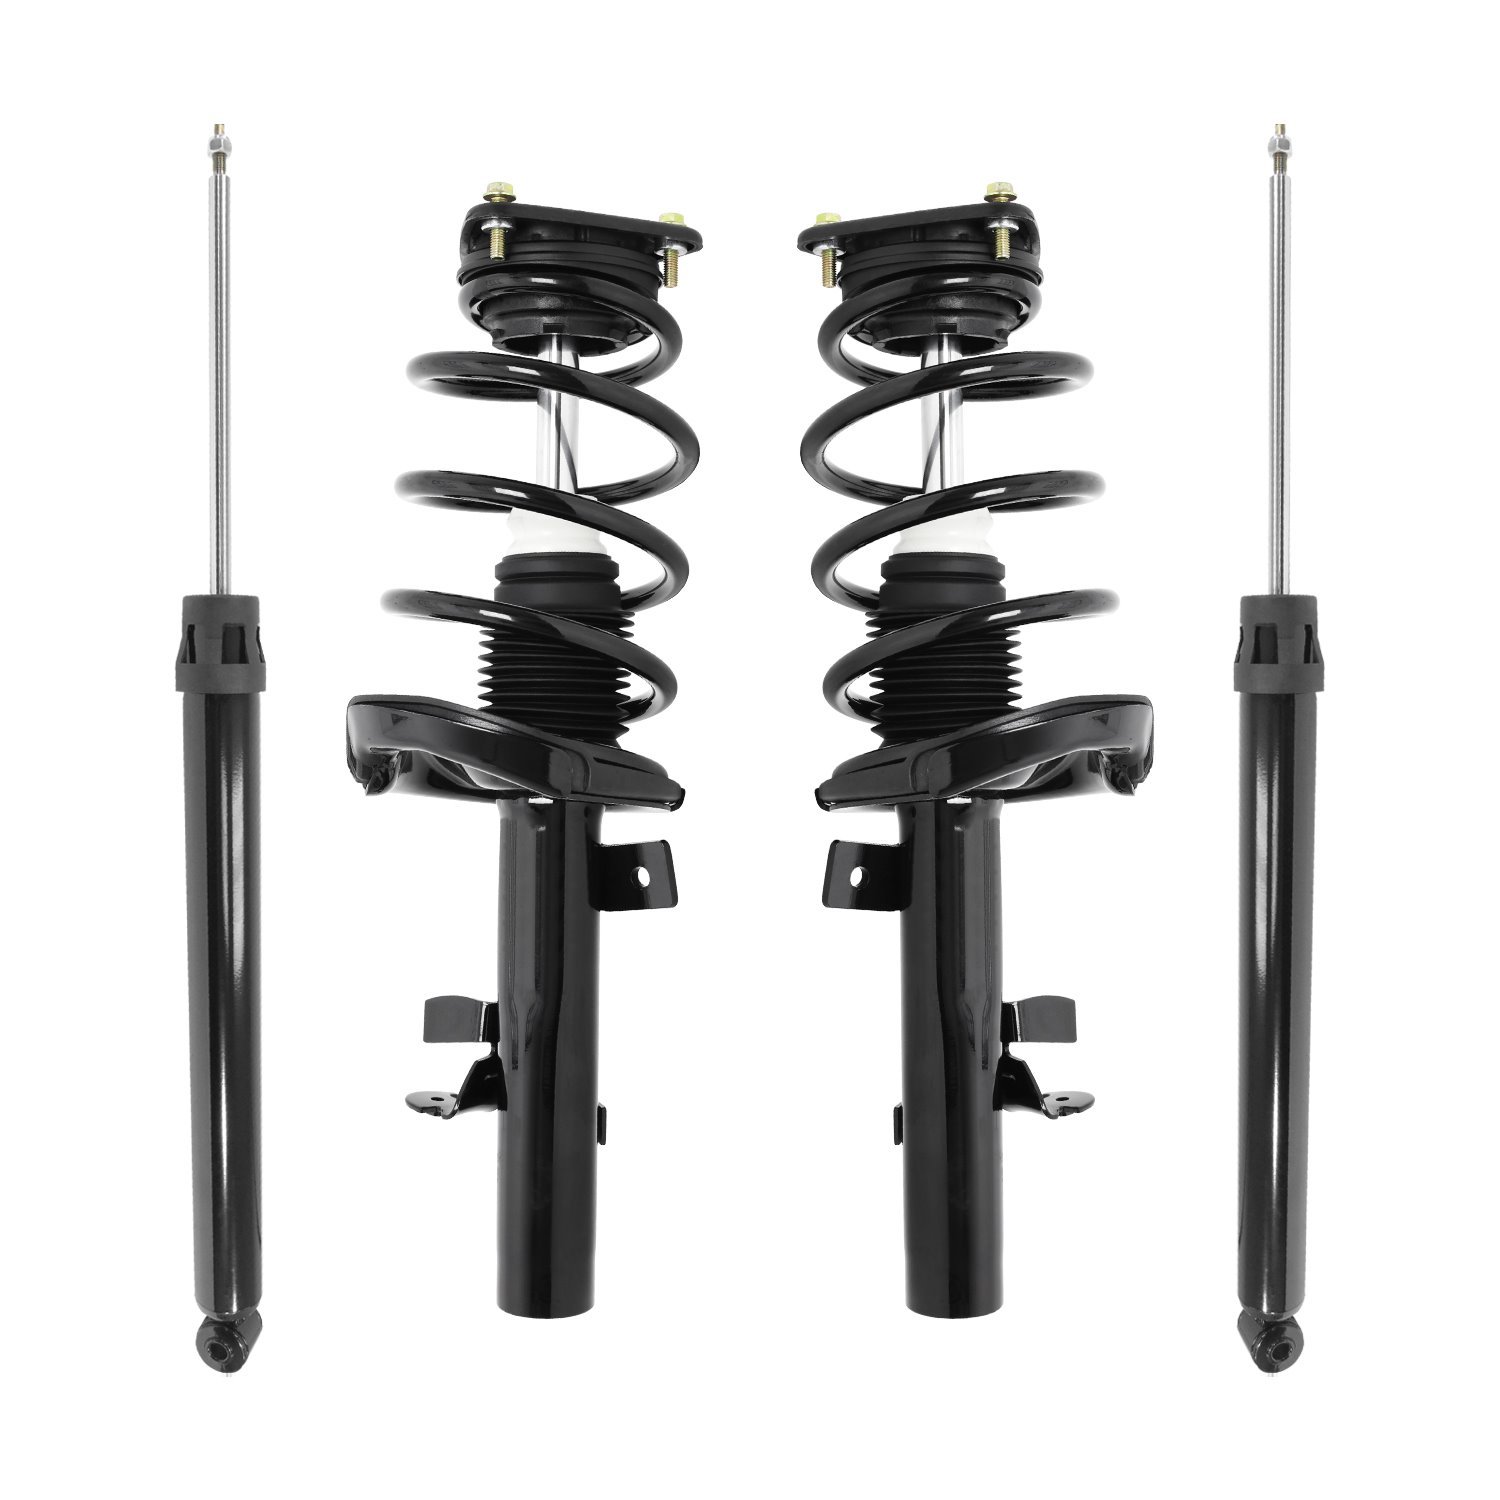 4-11085-252150-001 Front & Rear Suspension Strut & Coil Spring Assembly Fits Select Ford Focus